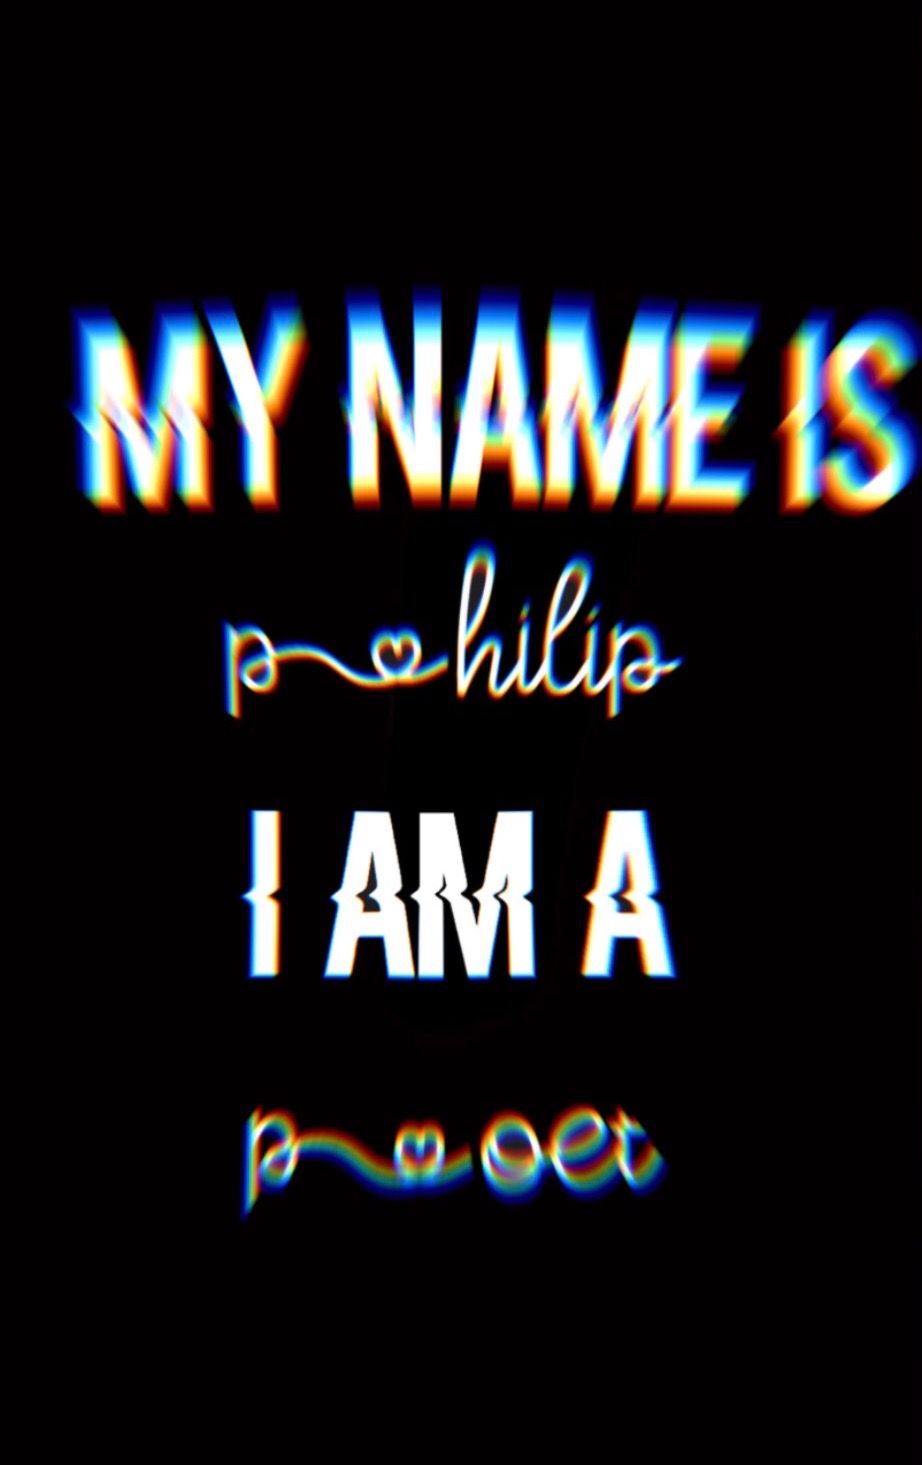 Hamilton iPhone Wallpaper Background My Name Is Philip I Am A